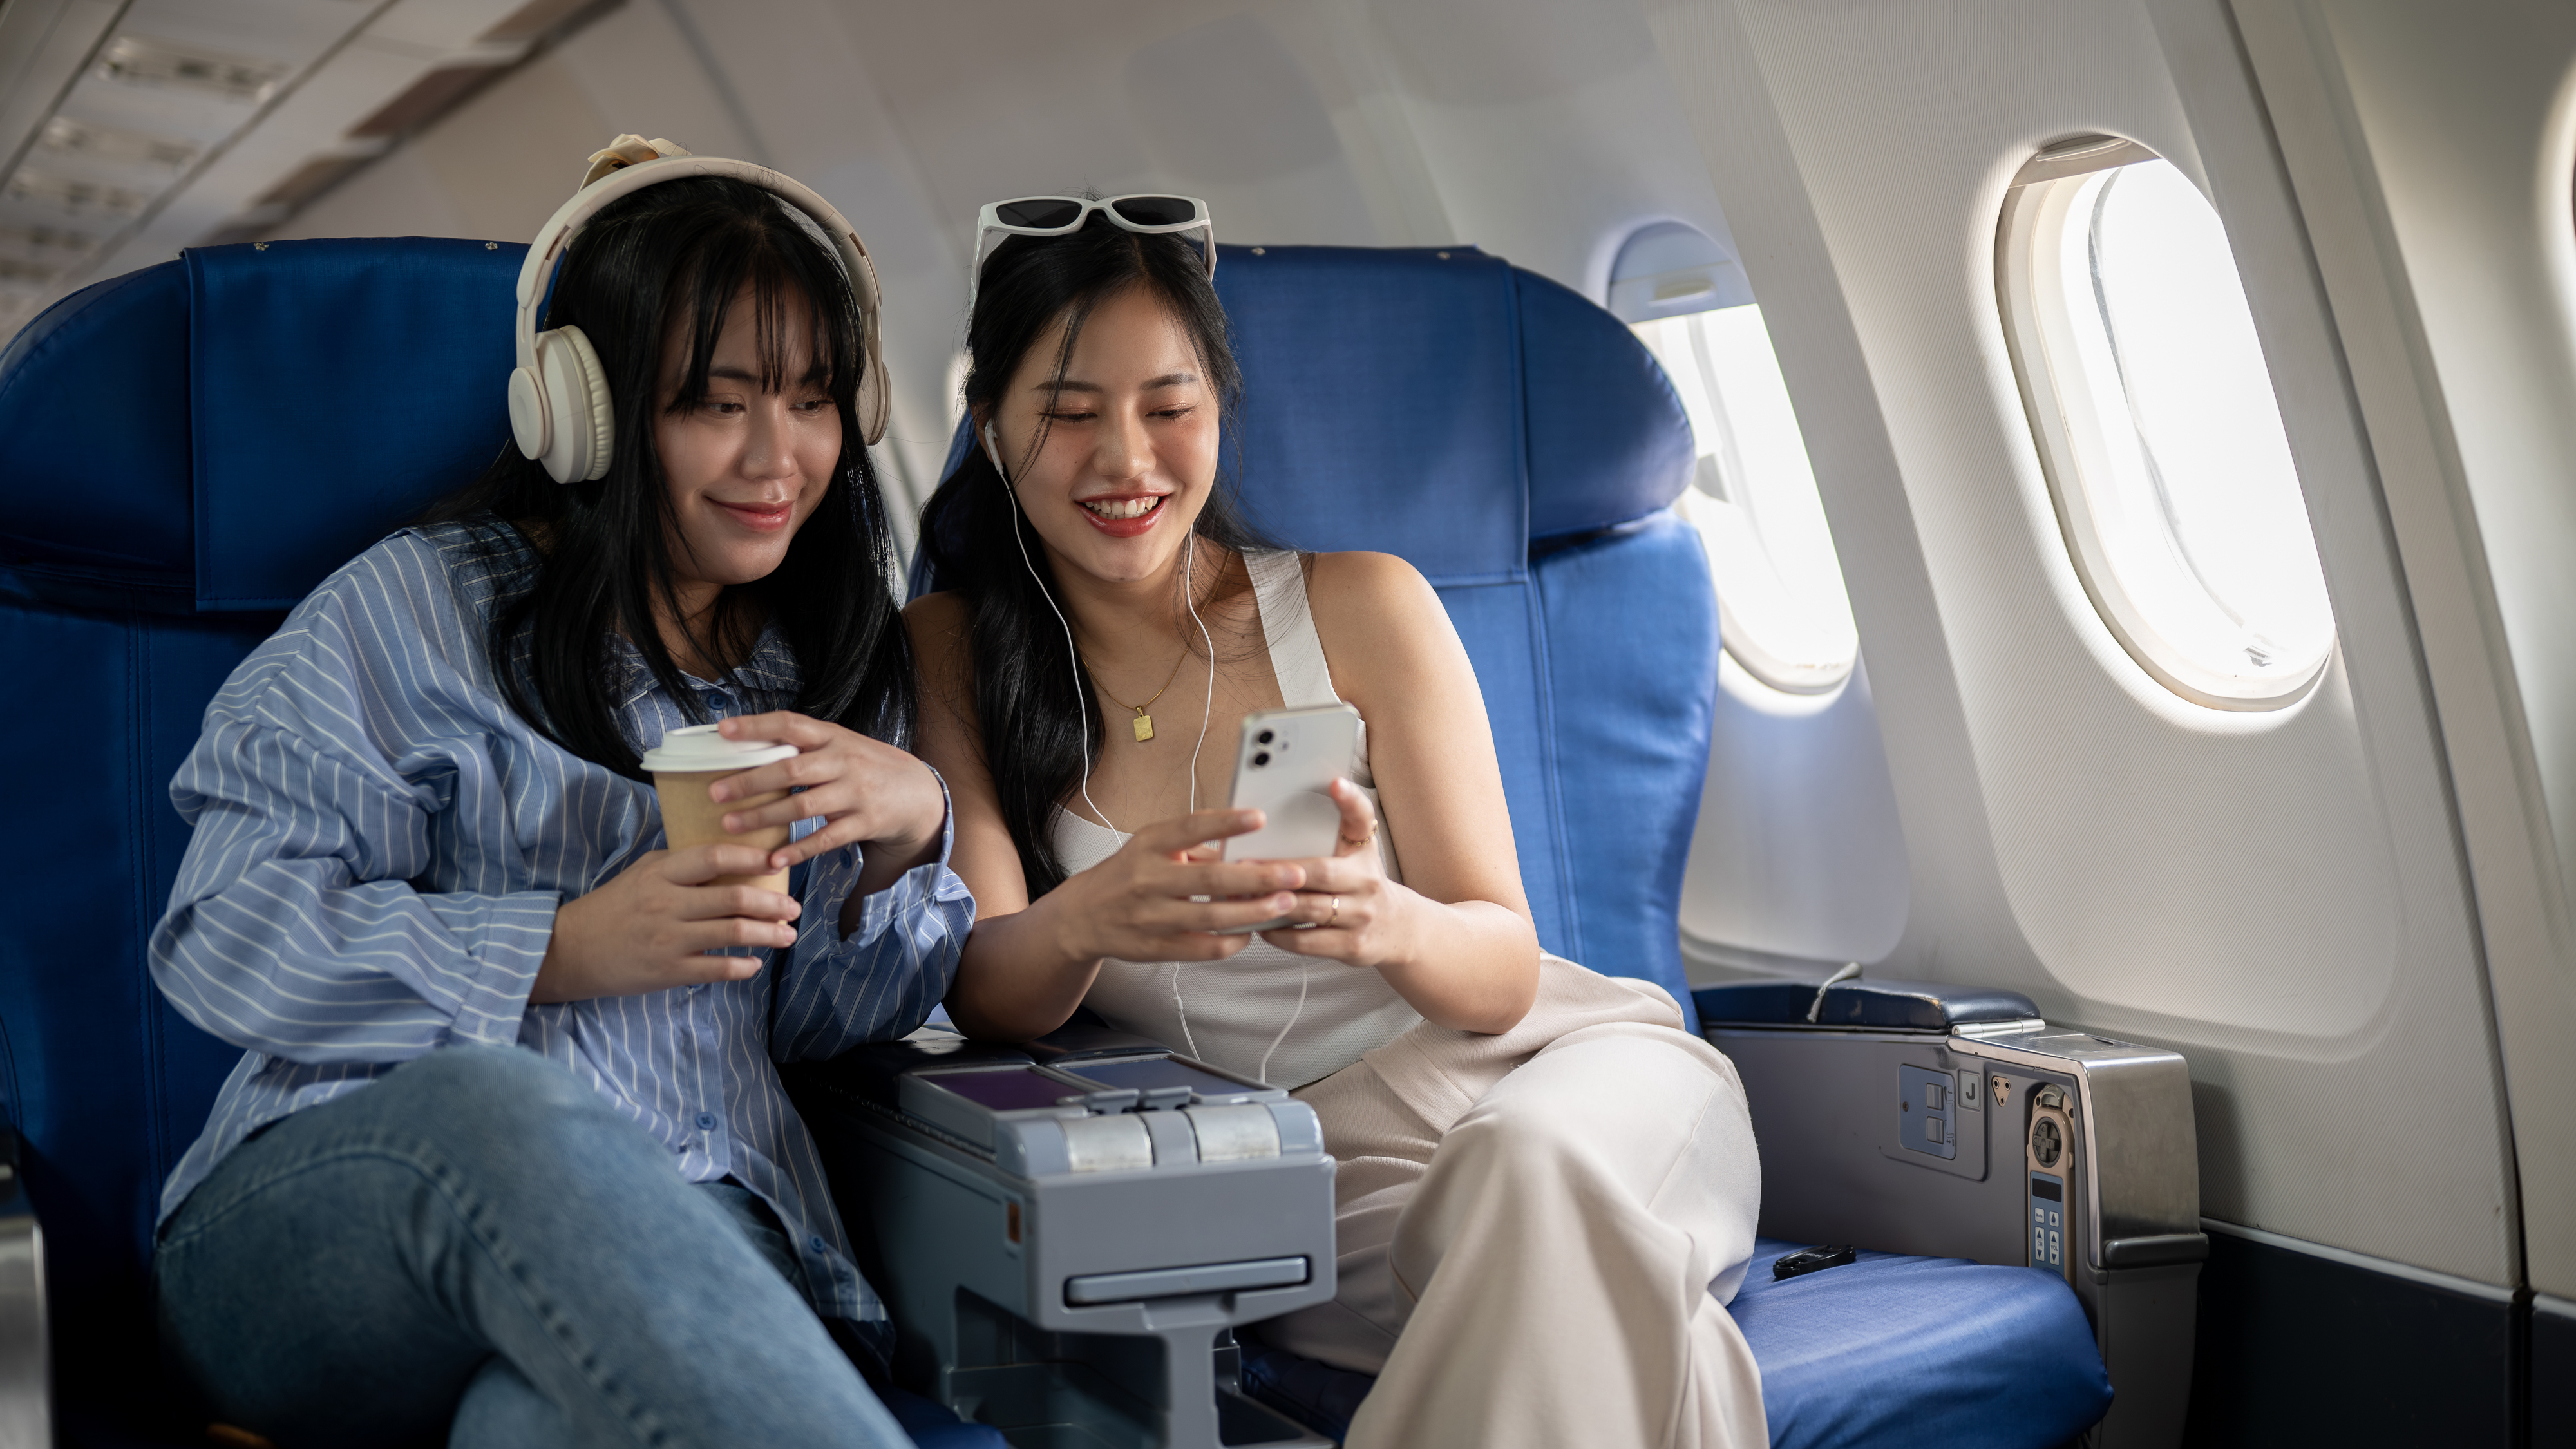 Two women sharing a screen on a phone while seated on a plane, one with headphones